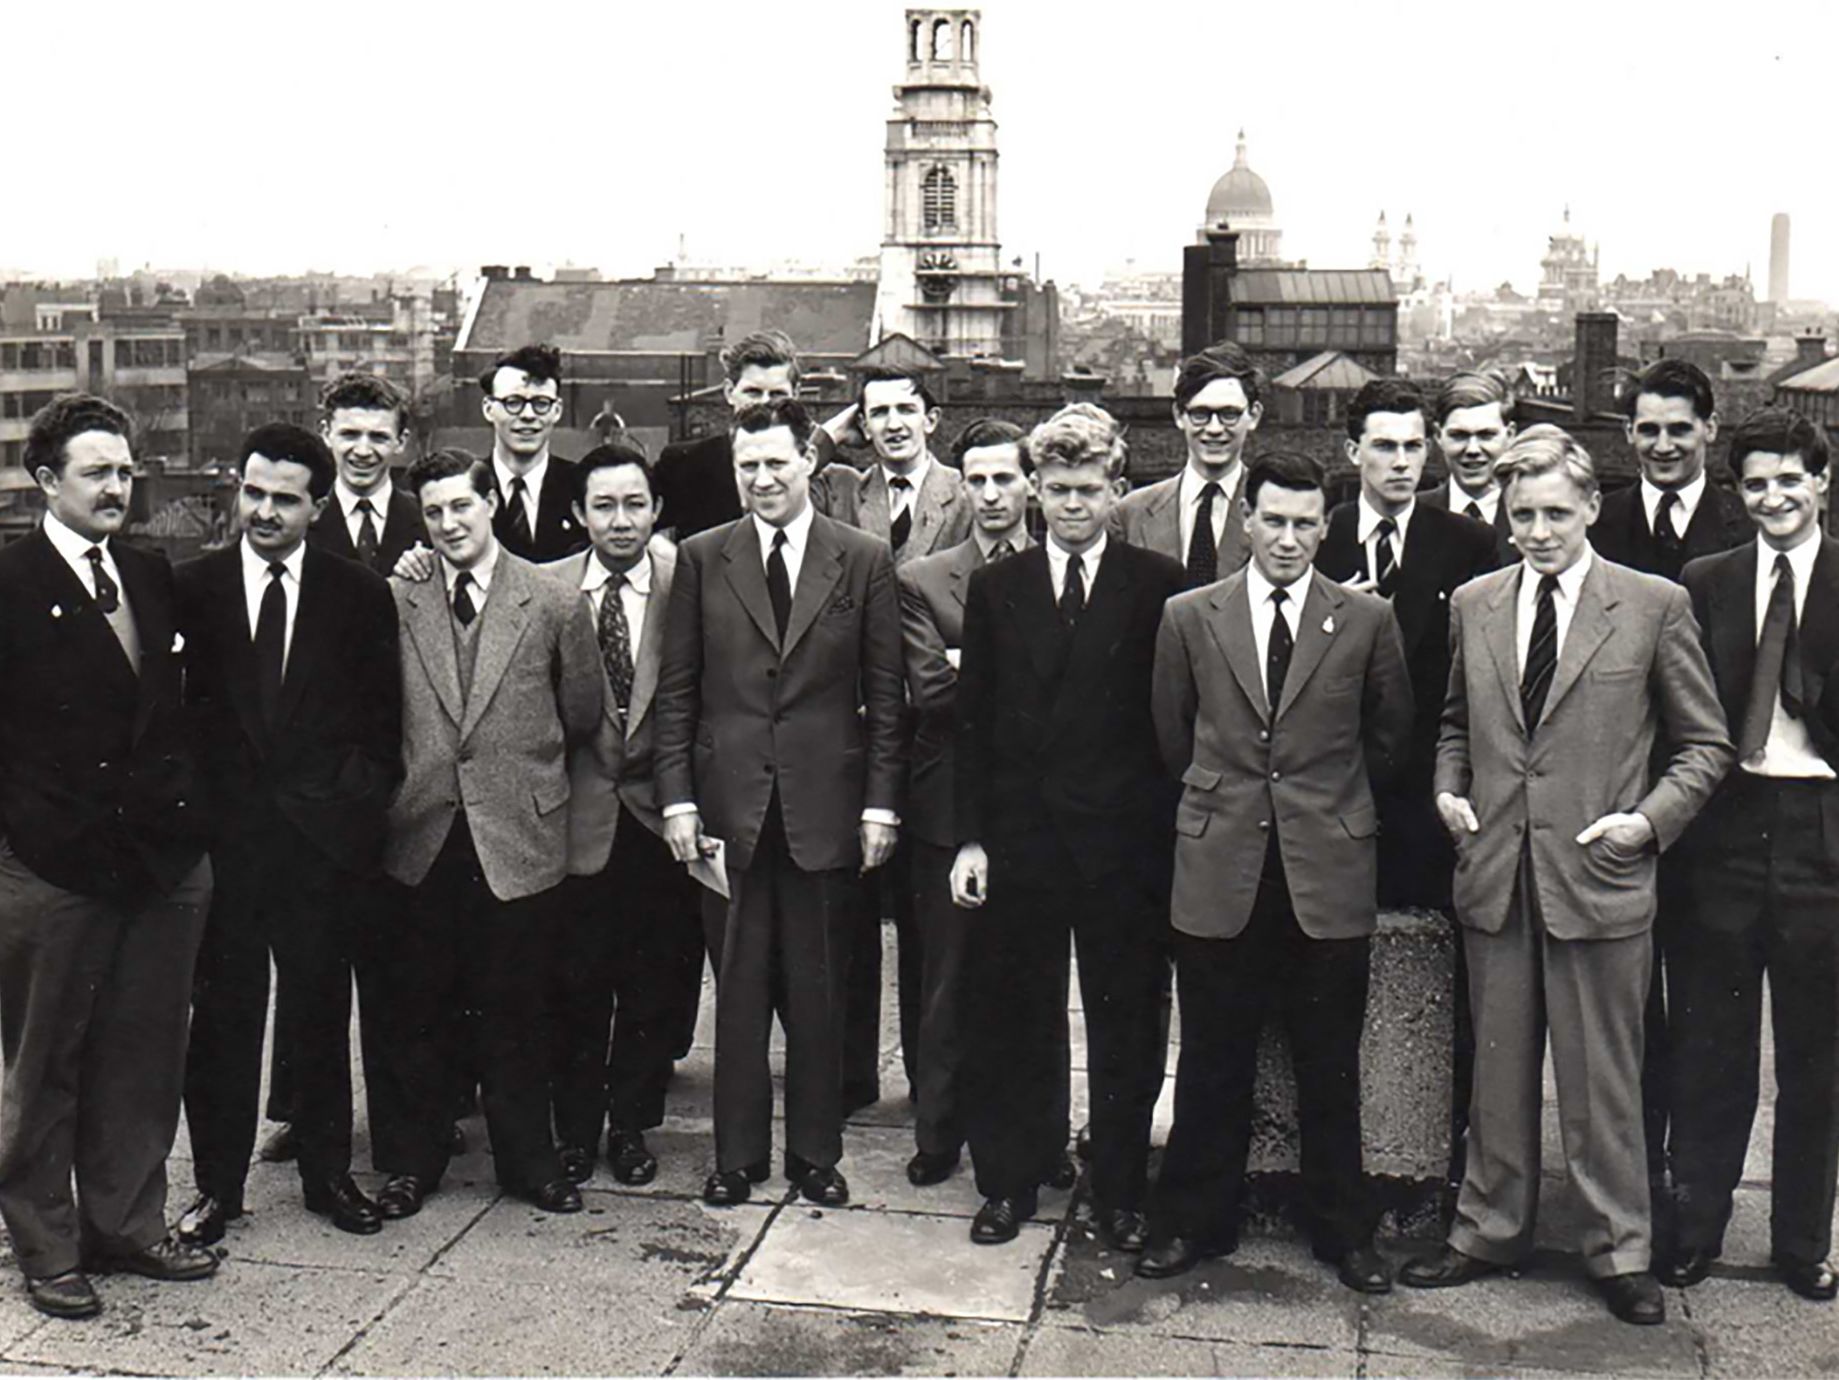 A photograph of the Class of 1956 on a rooftop.